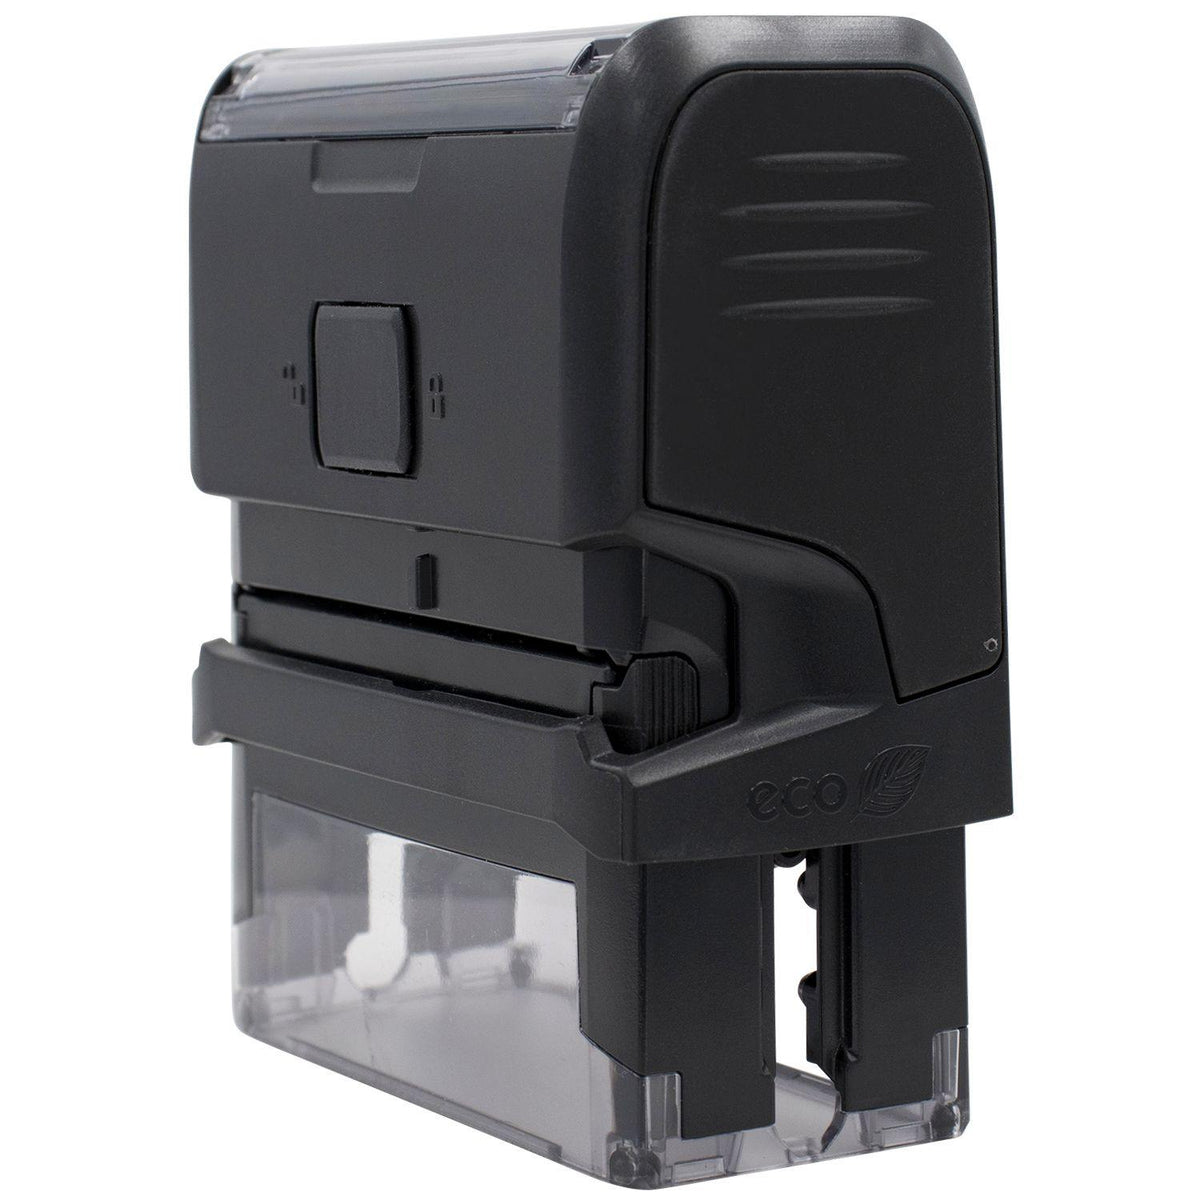 Self-Inking Skinny To the Parents of Stamp - Engineer Seal Stamps - Brand_Trodat, Impression Size_Small, Stamp Type_Self-Inking Stamp, Type of Use_Teacher